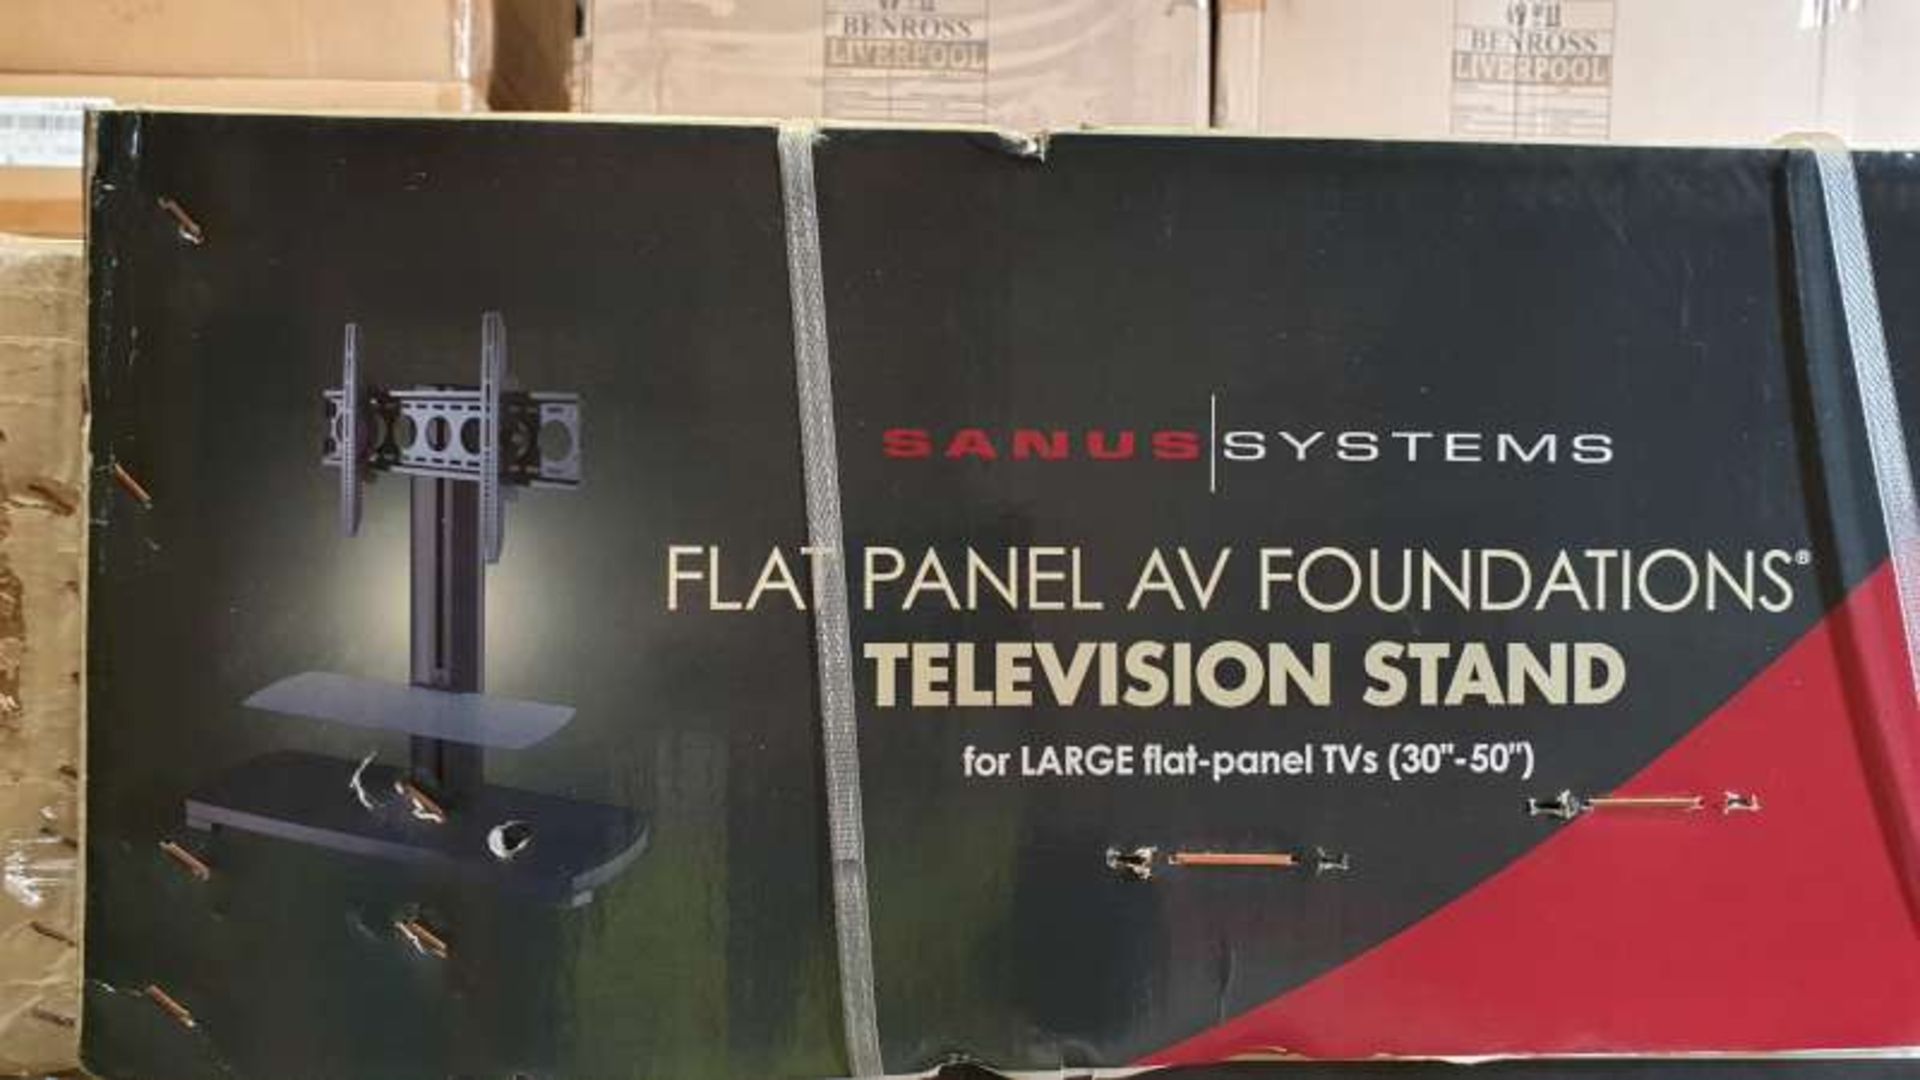 2 X SANUS SYSTEMS FLAT PANEL AV FOUNDATIONS TELEVISION STAND FOR LARGE FLAT PANEL TELEVISIONS